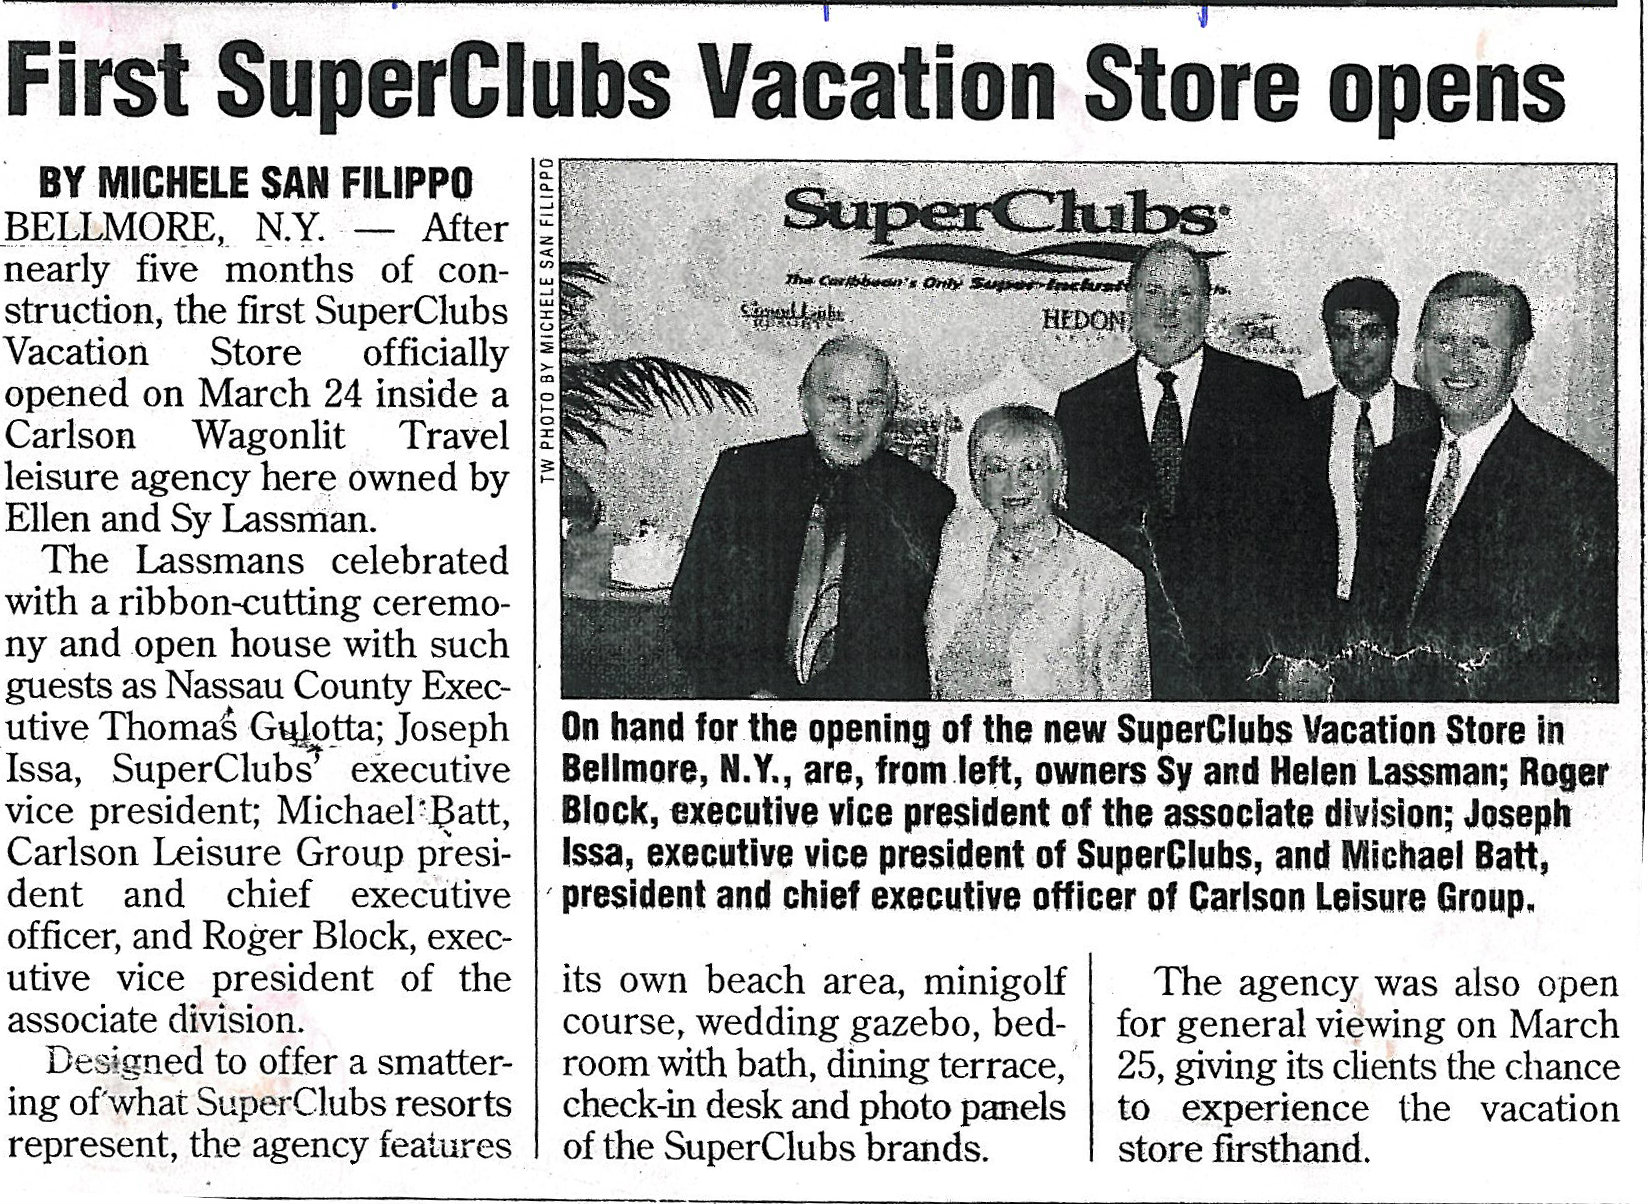 First SuperClubs Vacation Store opens